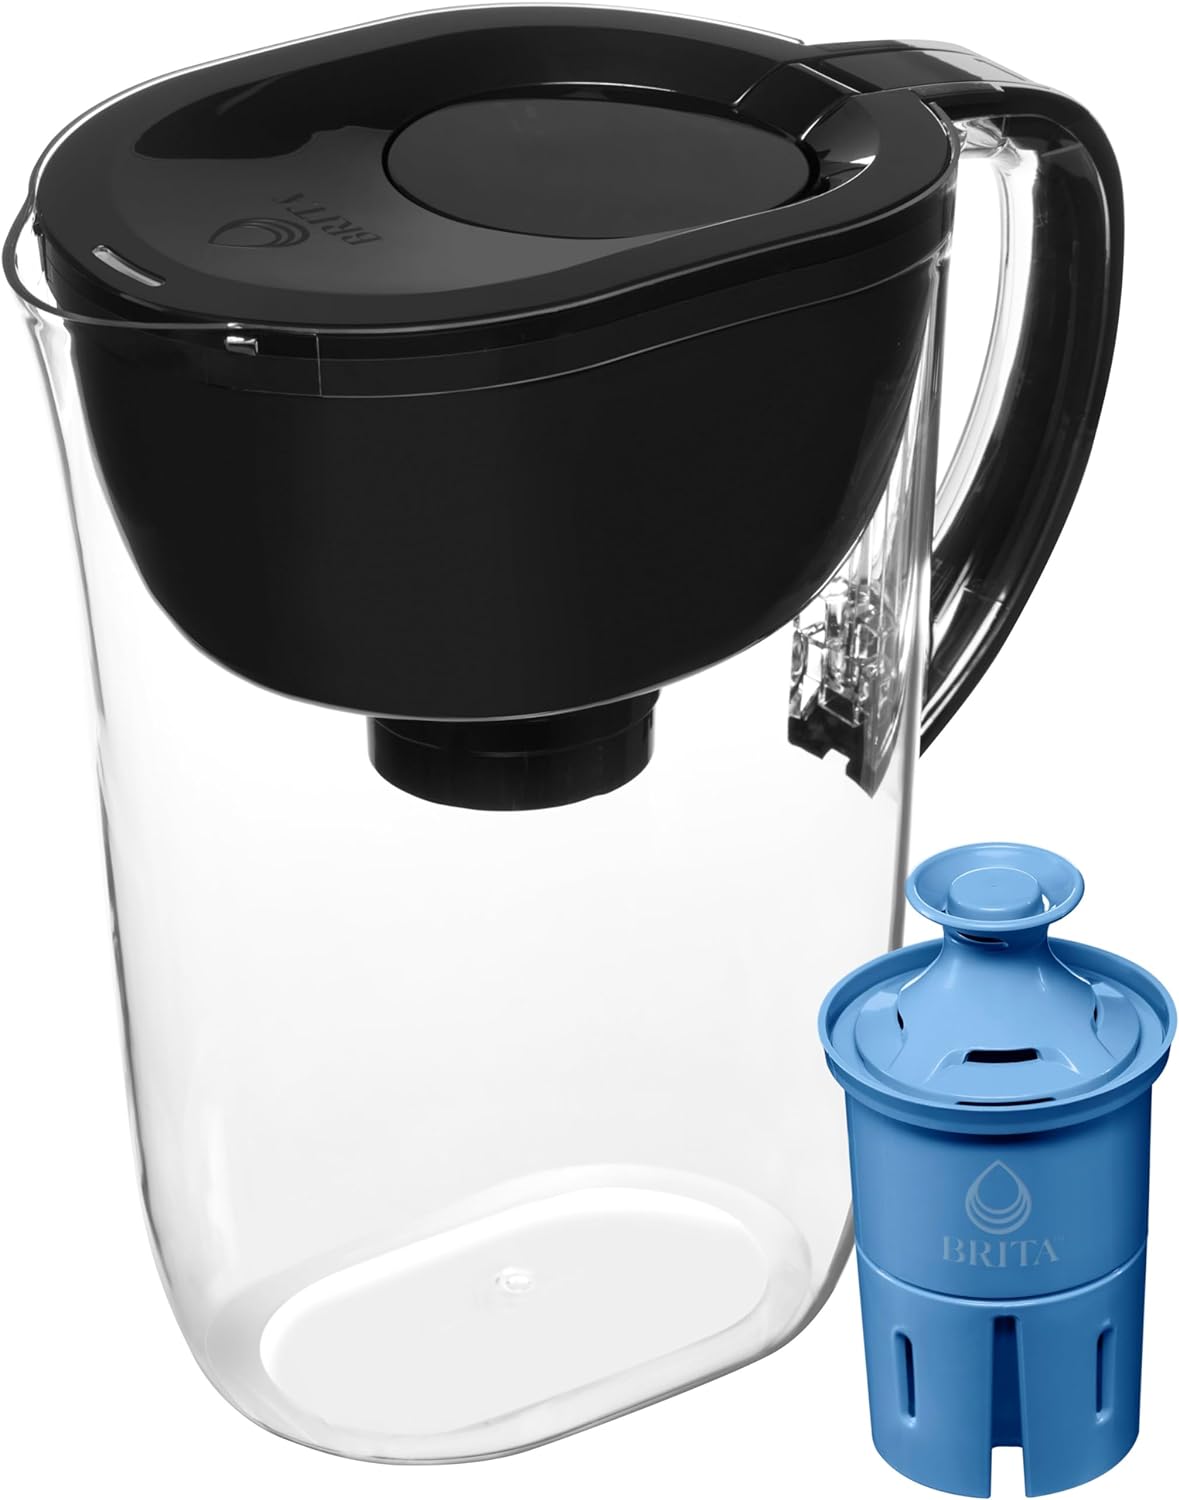 Brita Large Water Filter Pitcher for Tap and Drinking Water with SmartLight Filter Change Indicator + 1 Elite Filter, Reduces 99% Of Lead, Lasts 6 Months, 10-Cup Capacity, Black